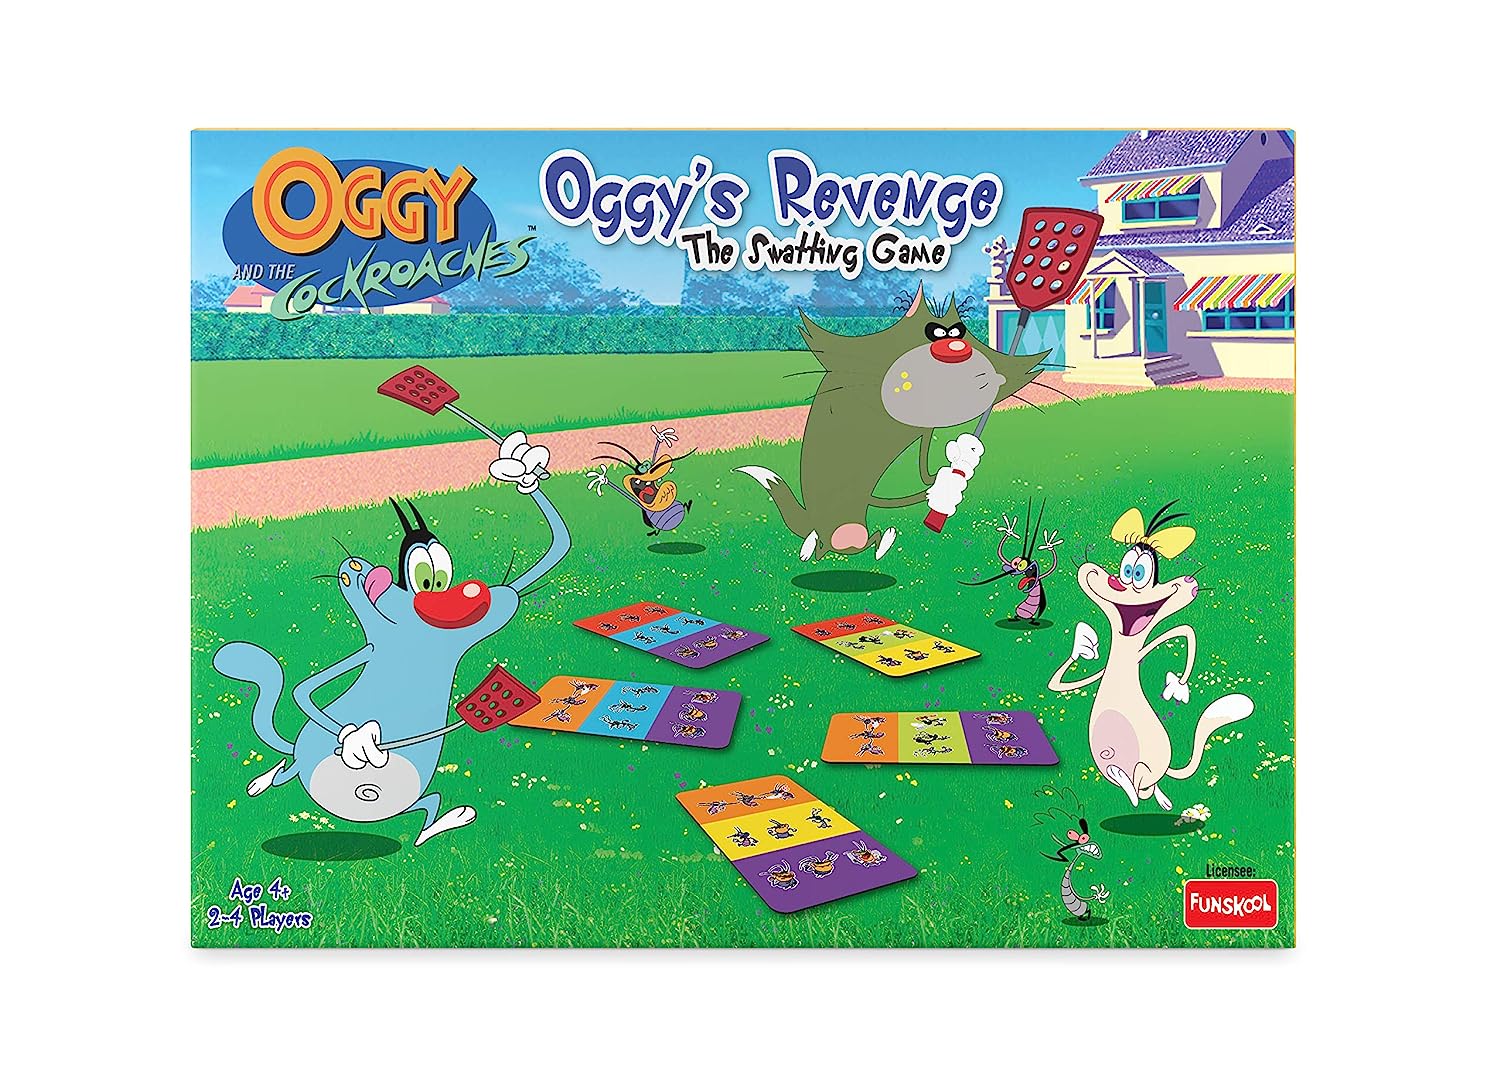 Funskool Oggy's Revenge, The Swatting Game, Family Entertainment Game, Kids and Family, 2-4 Players